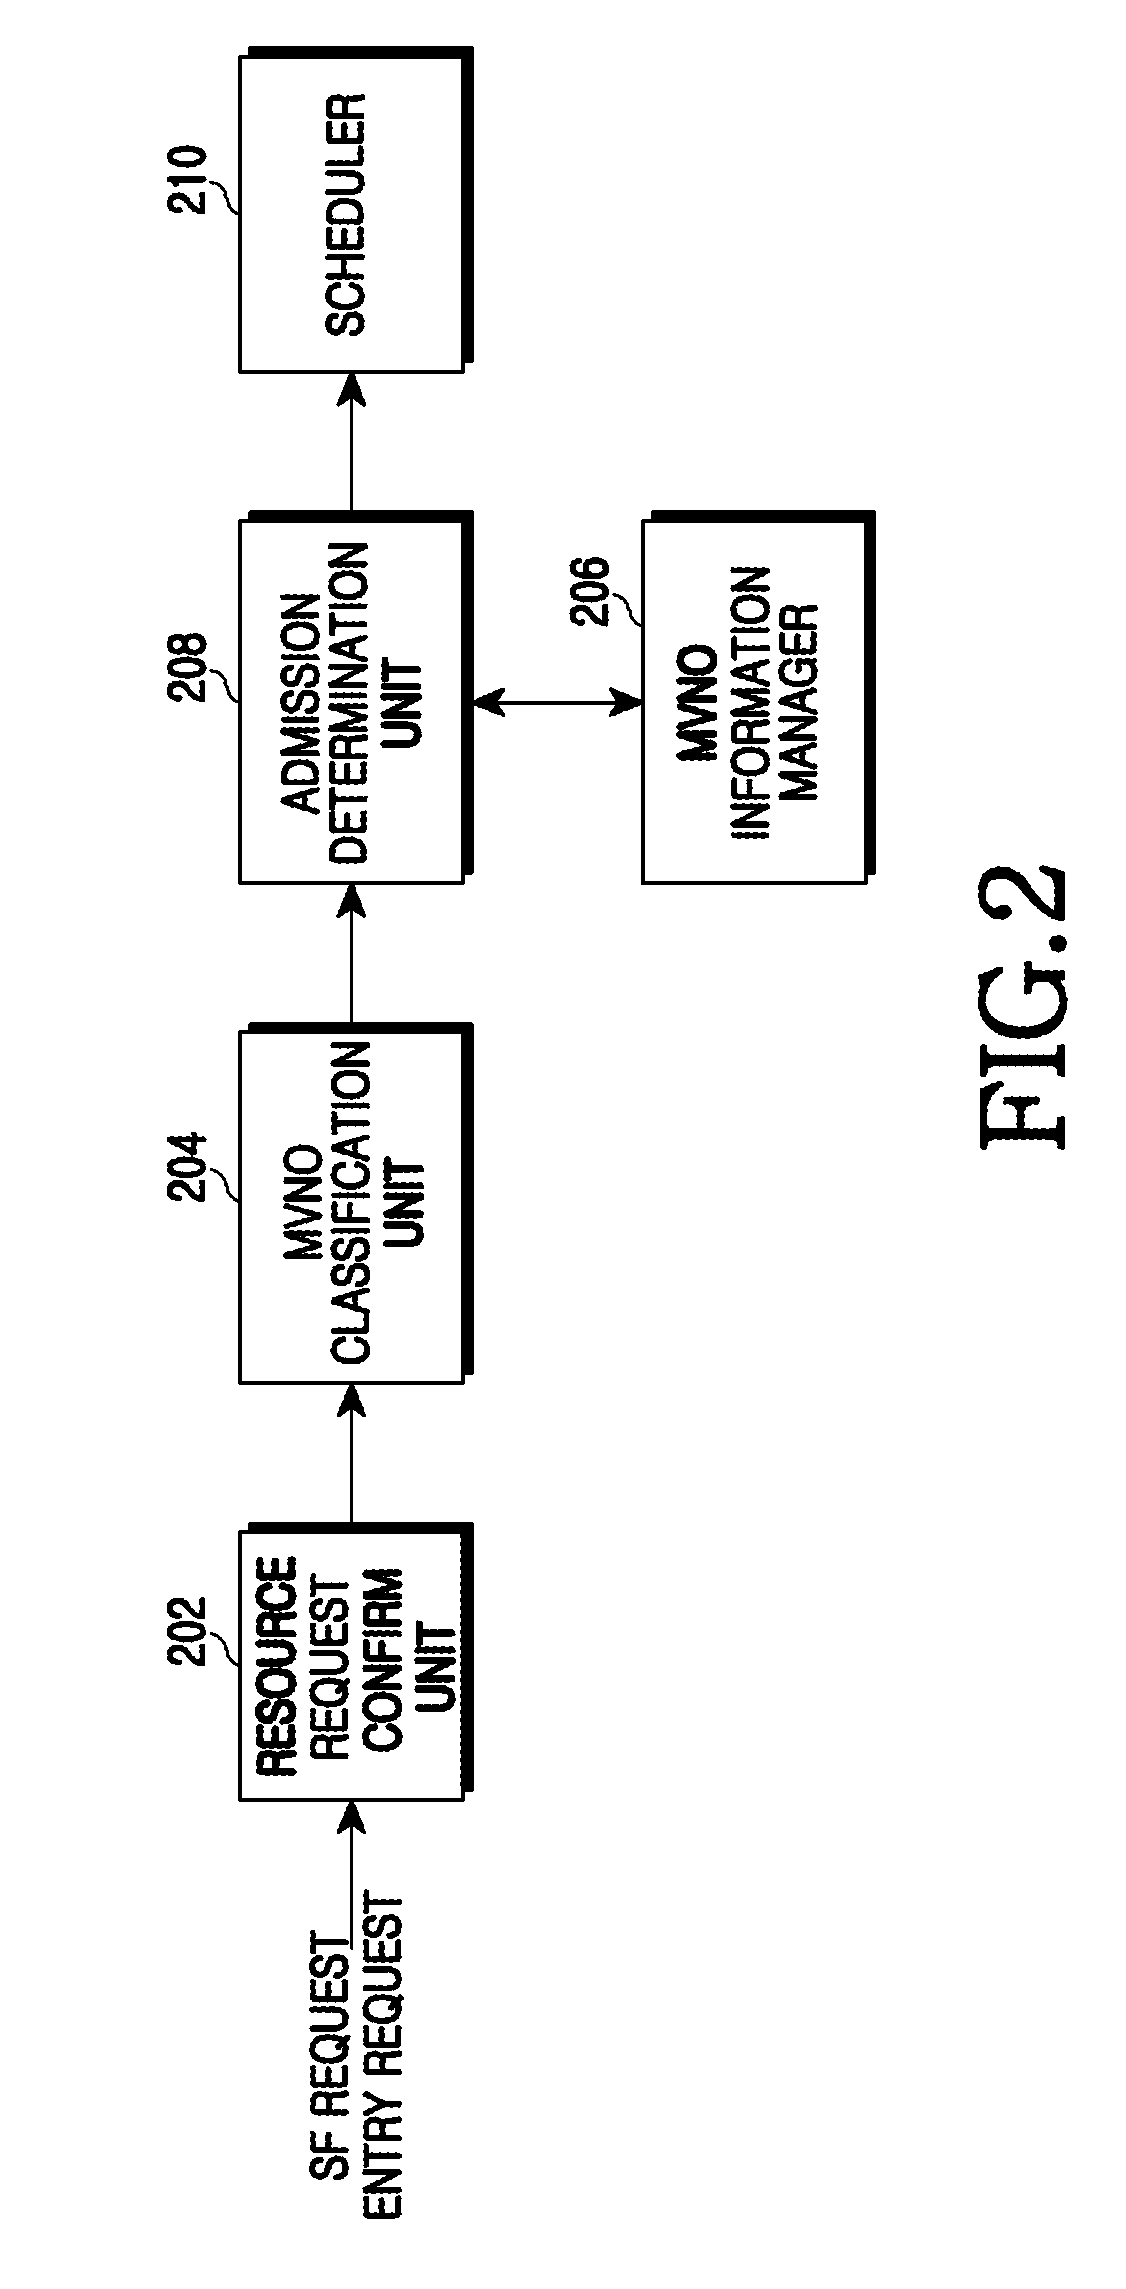 Apparatus and method for admission control considering multiple service providers in a broadband wireless communication system